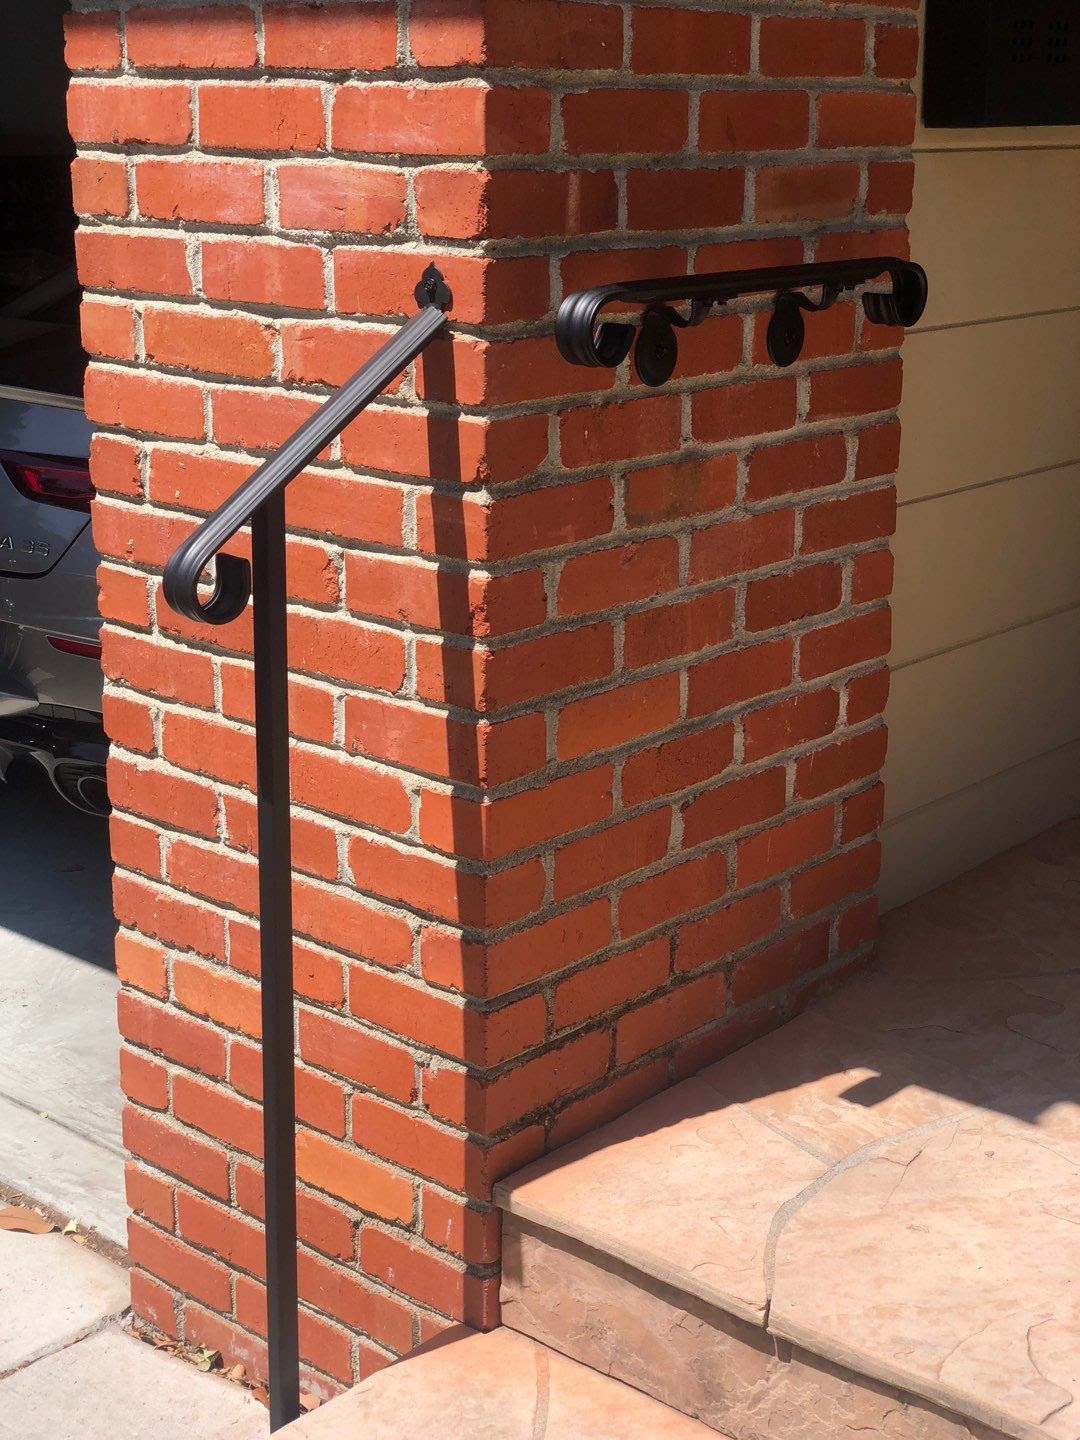 Wrought iron door handrail with wall-mounted handrail